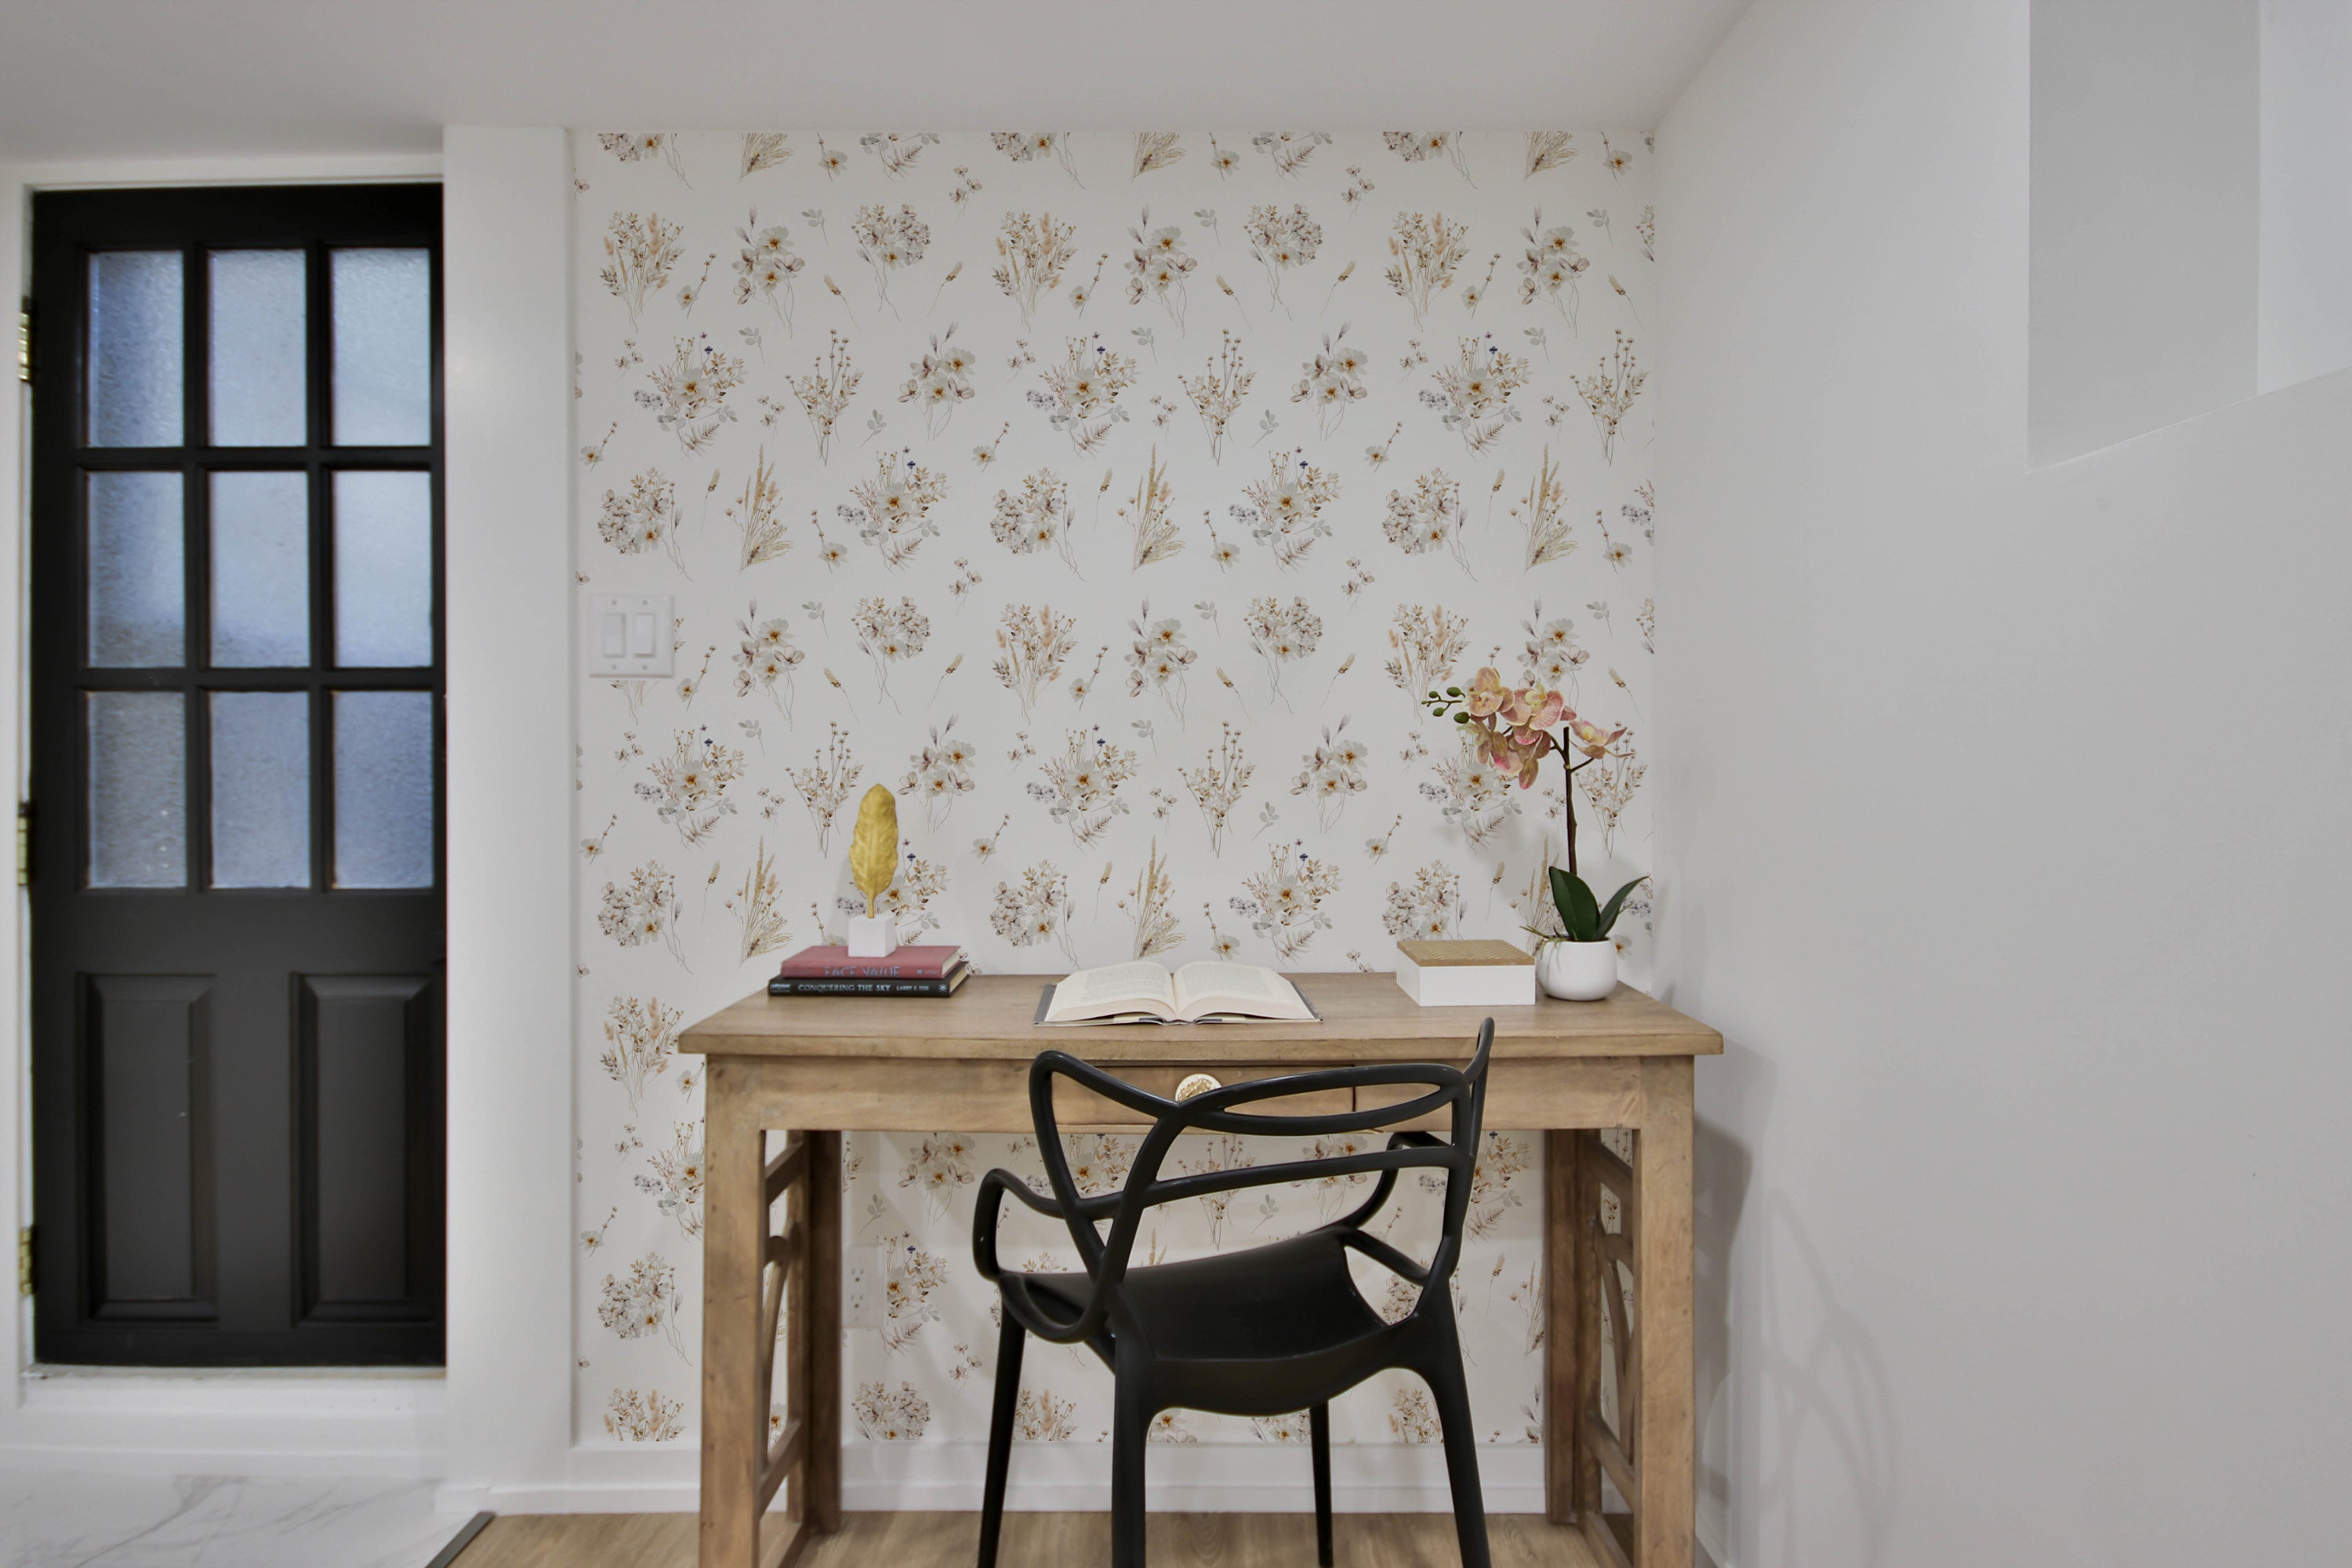 A modern workspace corner with the 'Meadow Muse Wallpaper' as a backdrop featuring a pattern of delicate dried flowers in soft brown and beige tones, complementing the sleek wooden desk and black chair.